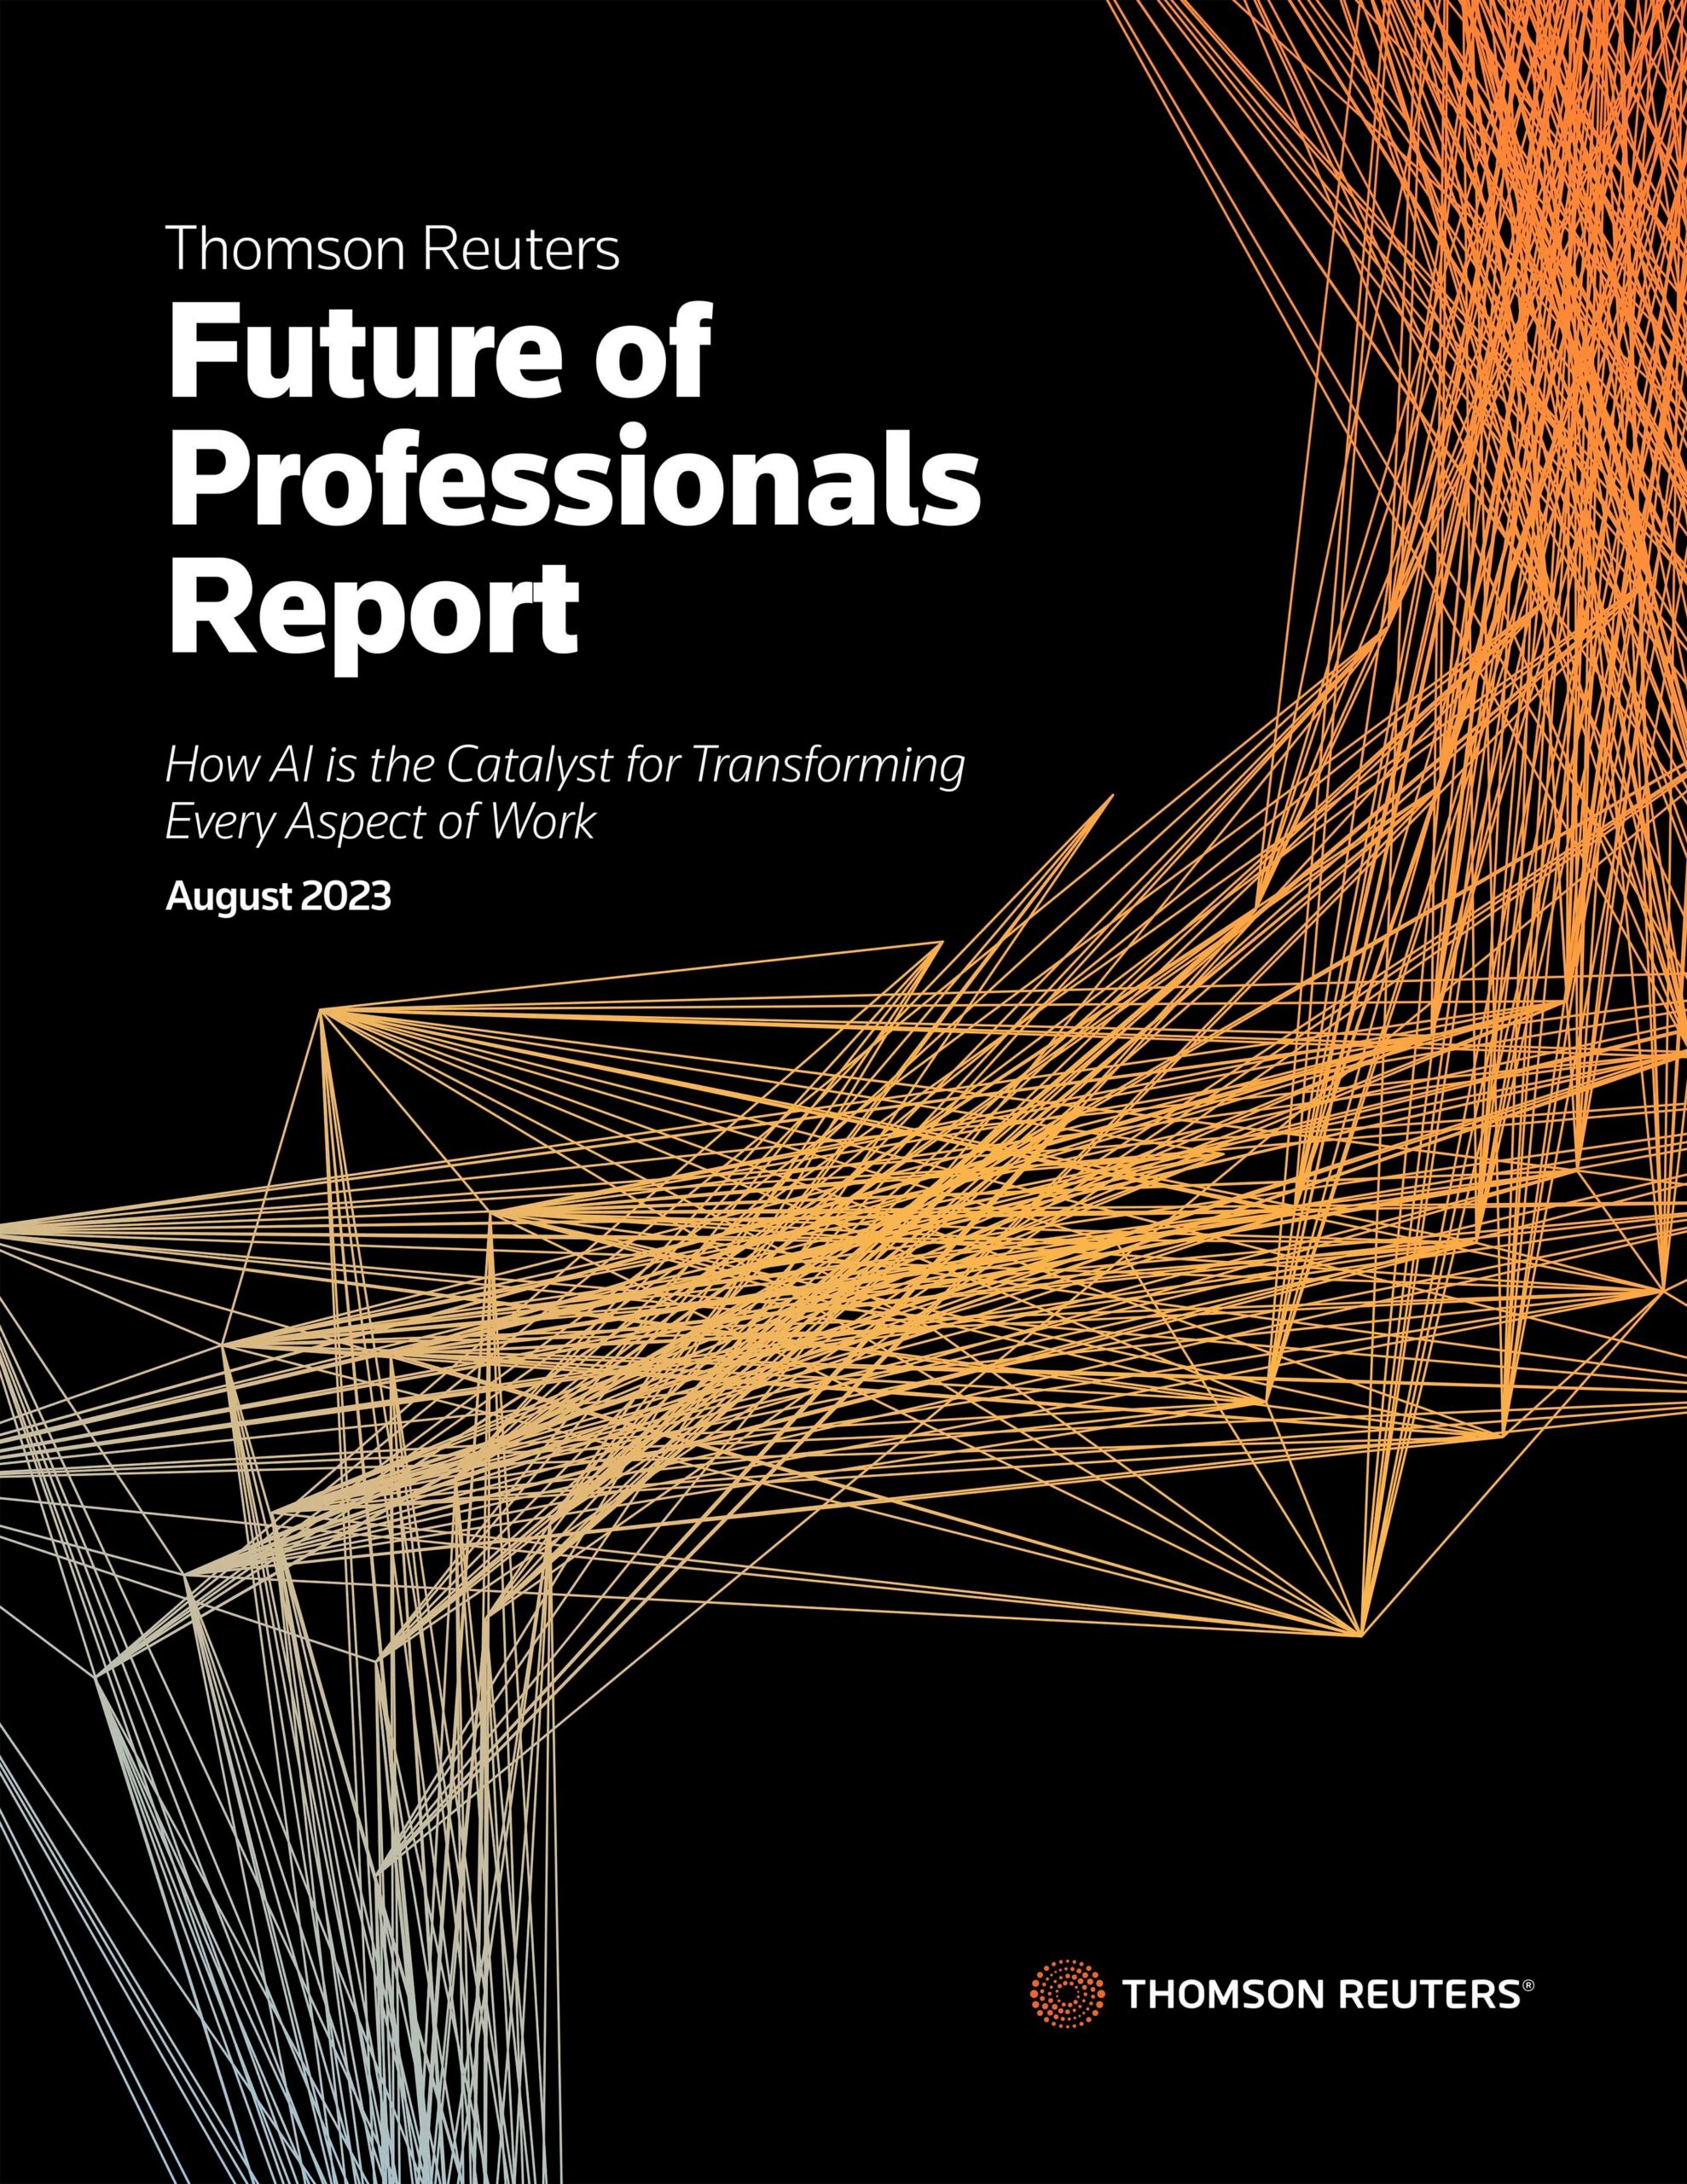 Cover of the 2023 Future of Professionals Report showing light orange, yellow, and light blue lines against a black background.